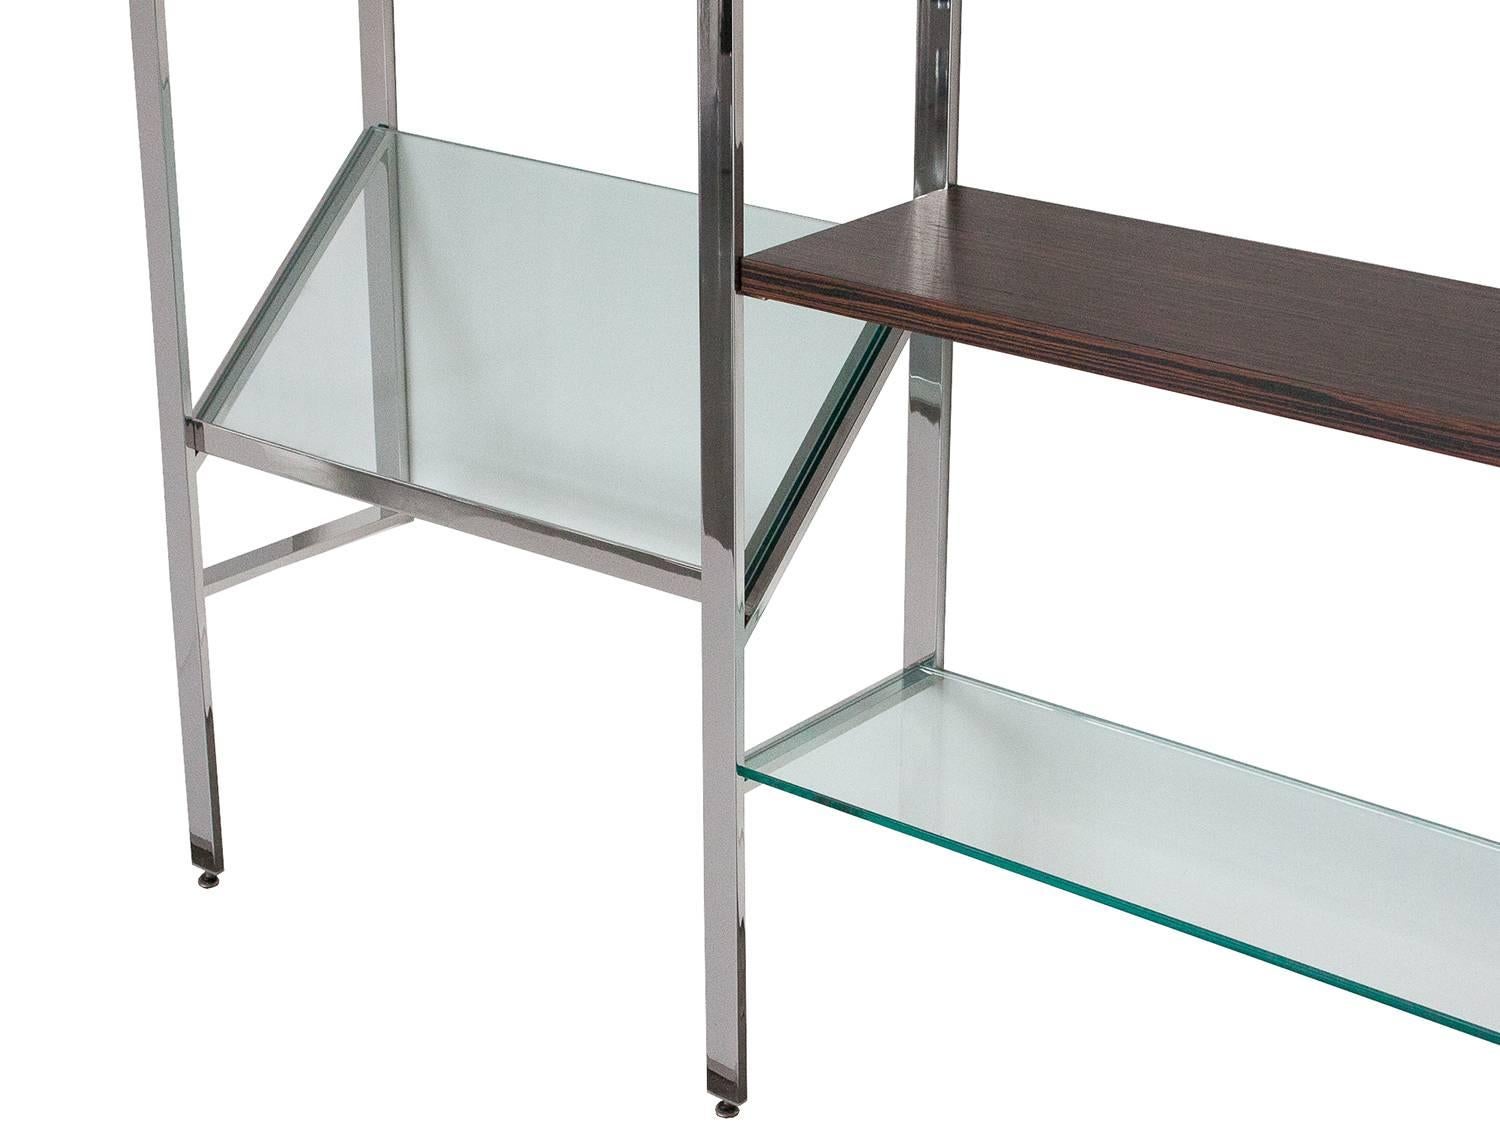 Late 20th Century Milo Baughman Chrome and Glass Wall-Mounted Shelving System